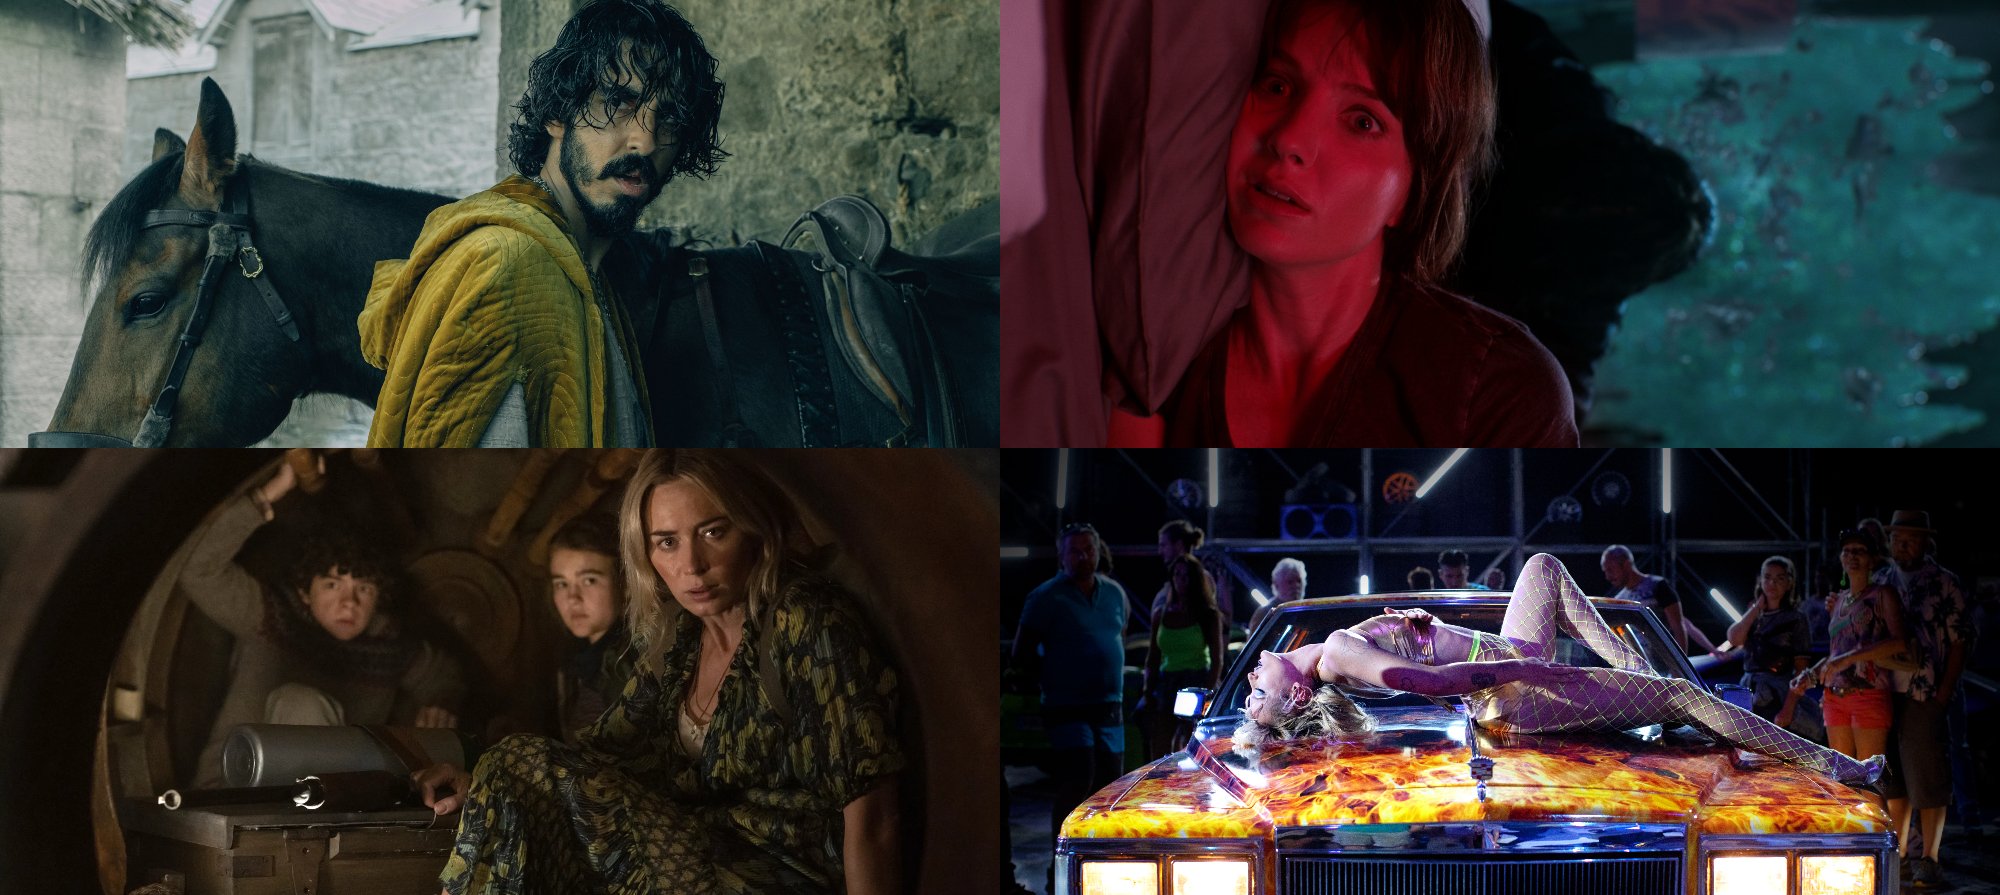 The Isaac Awards 2022 Fan Favorite Movie Dev Patel as Gawain, Madison as Annabelle Wallis, Noah Jupe as Marcus, Millicent Simmonds as Regan, and Emily Blunt as Evelyn, Agathe Rousselle as Alexia in collage